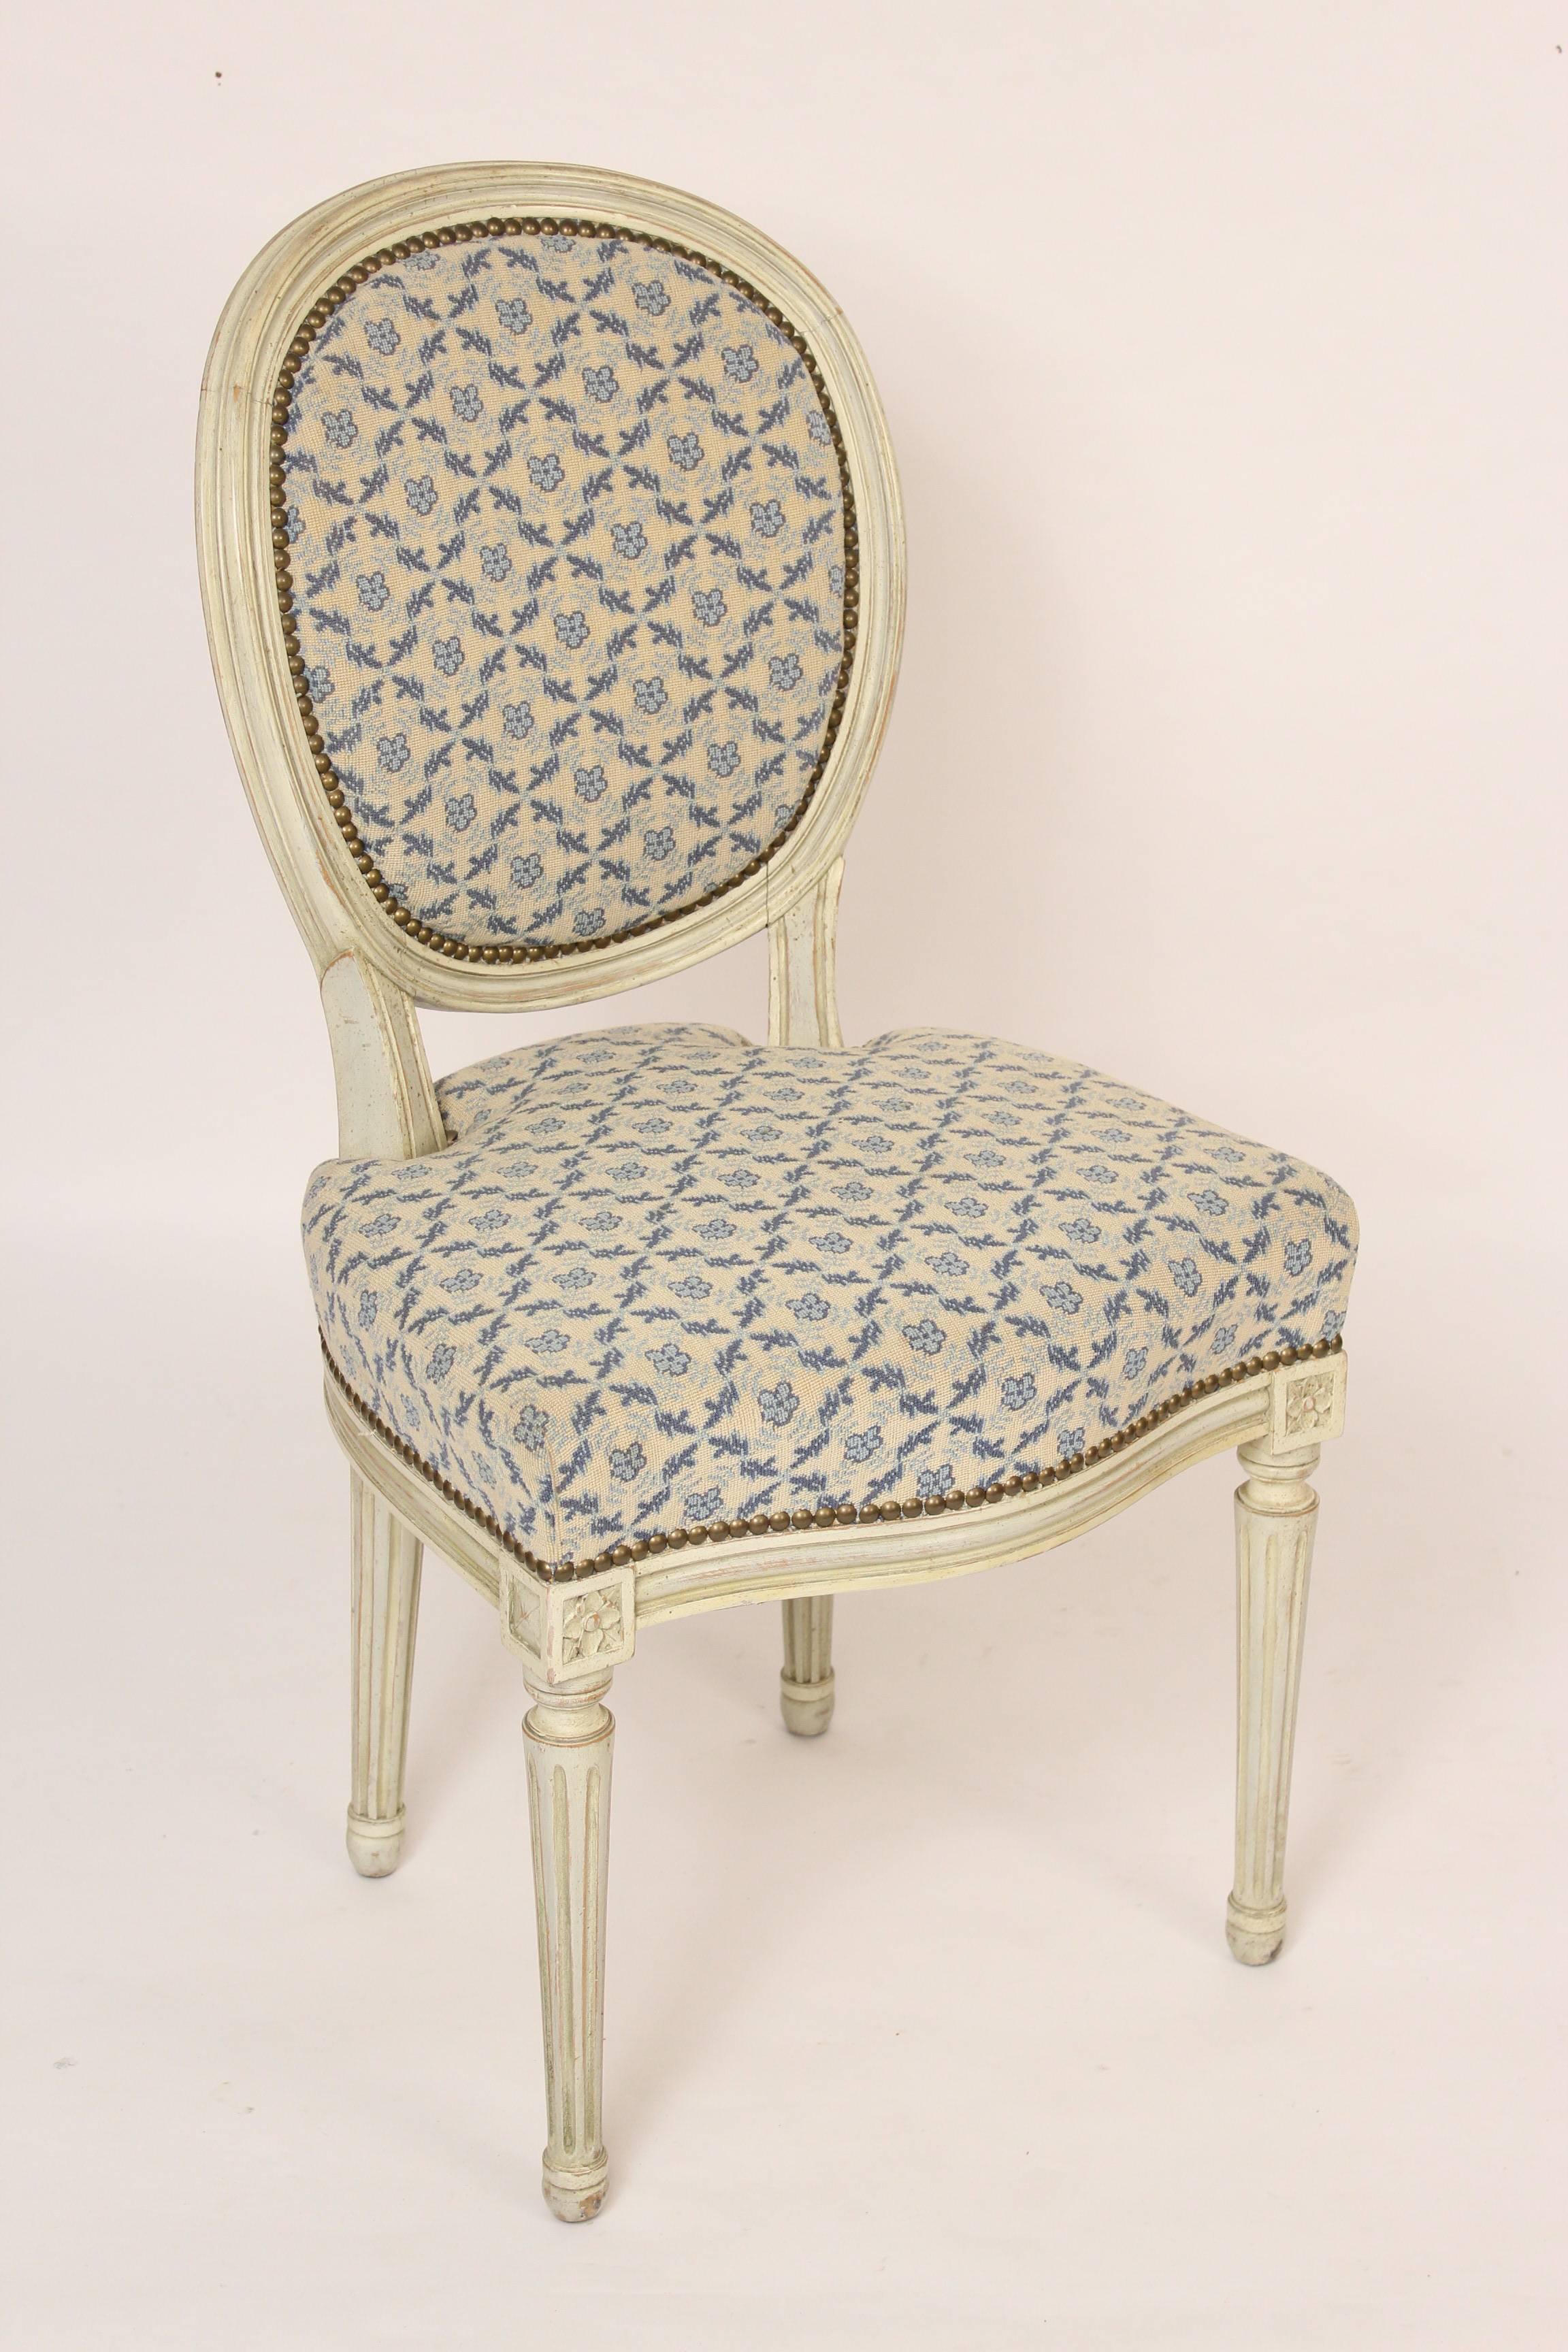 Set of four Louis XVI style griselle painted side chairs, mid-20th century. These chairs are excellent quality with painted frames, Fine quality upholstery, brass nailheads and spring seated inner construction.